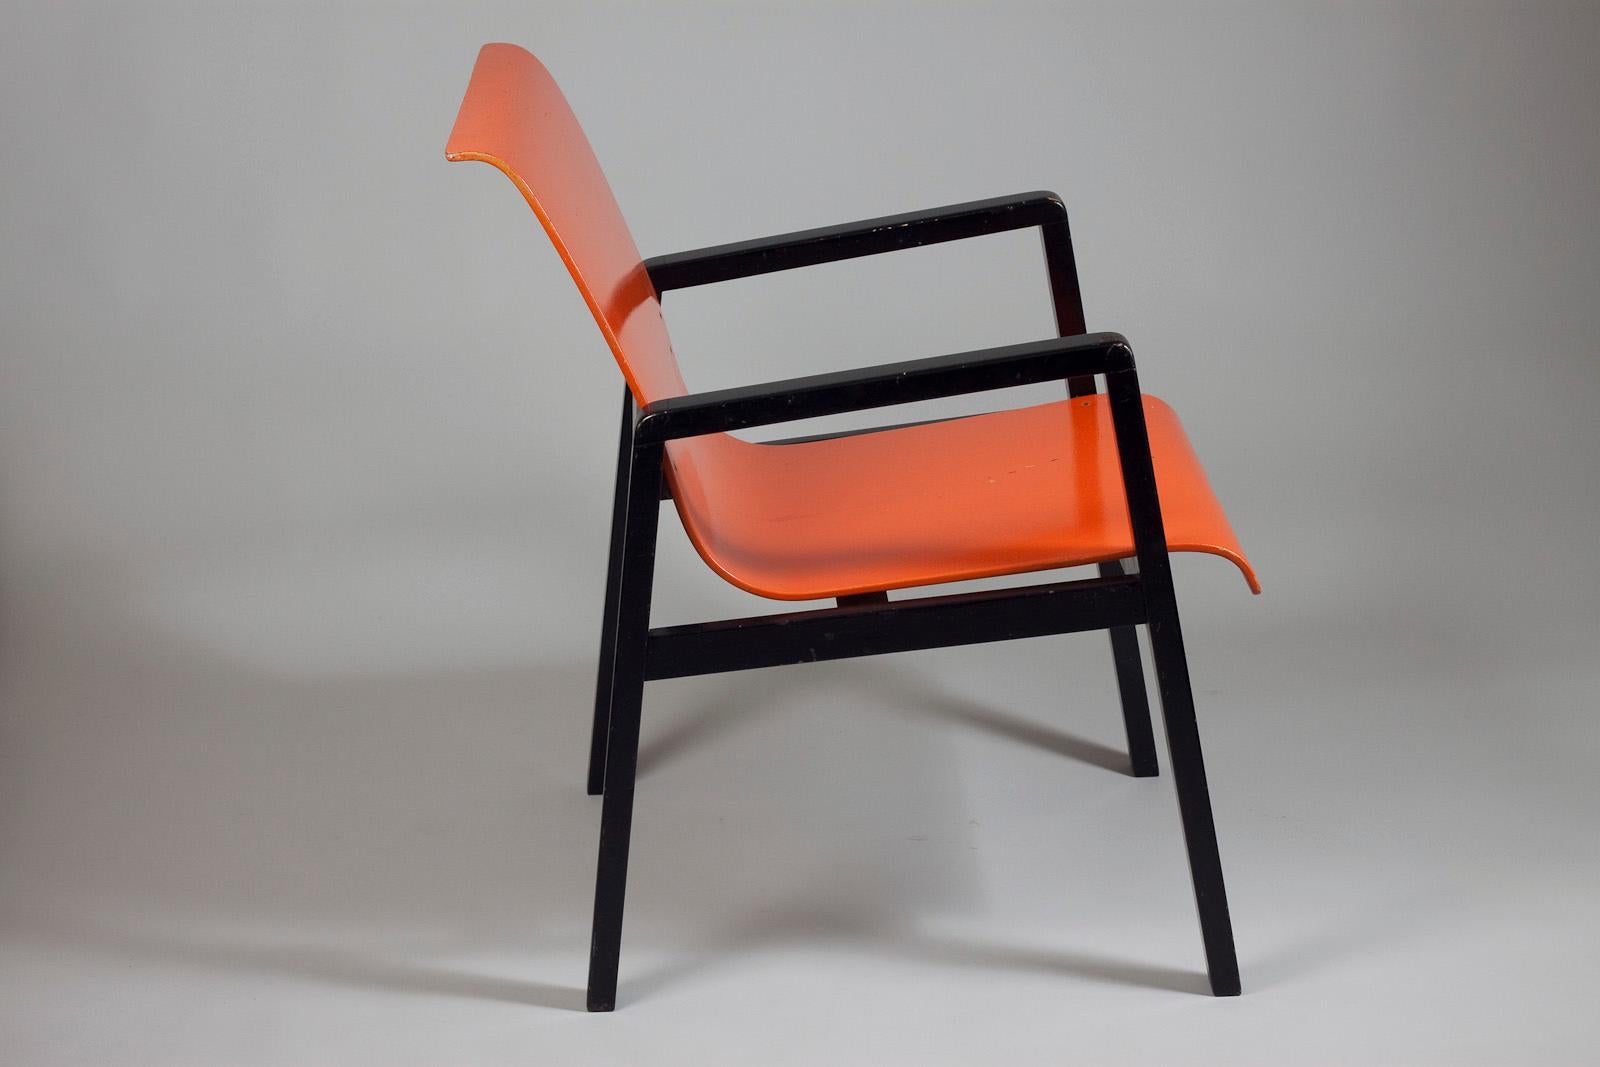 Alvar Aalto designed this chair in 1932 for the Paimio Sanatorium hospital for tuberculosis patients. The orange colour was used to reduce the blood pressure in the patients.